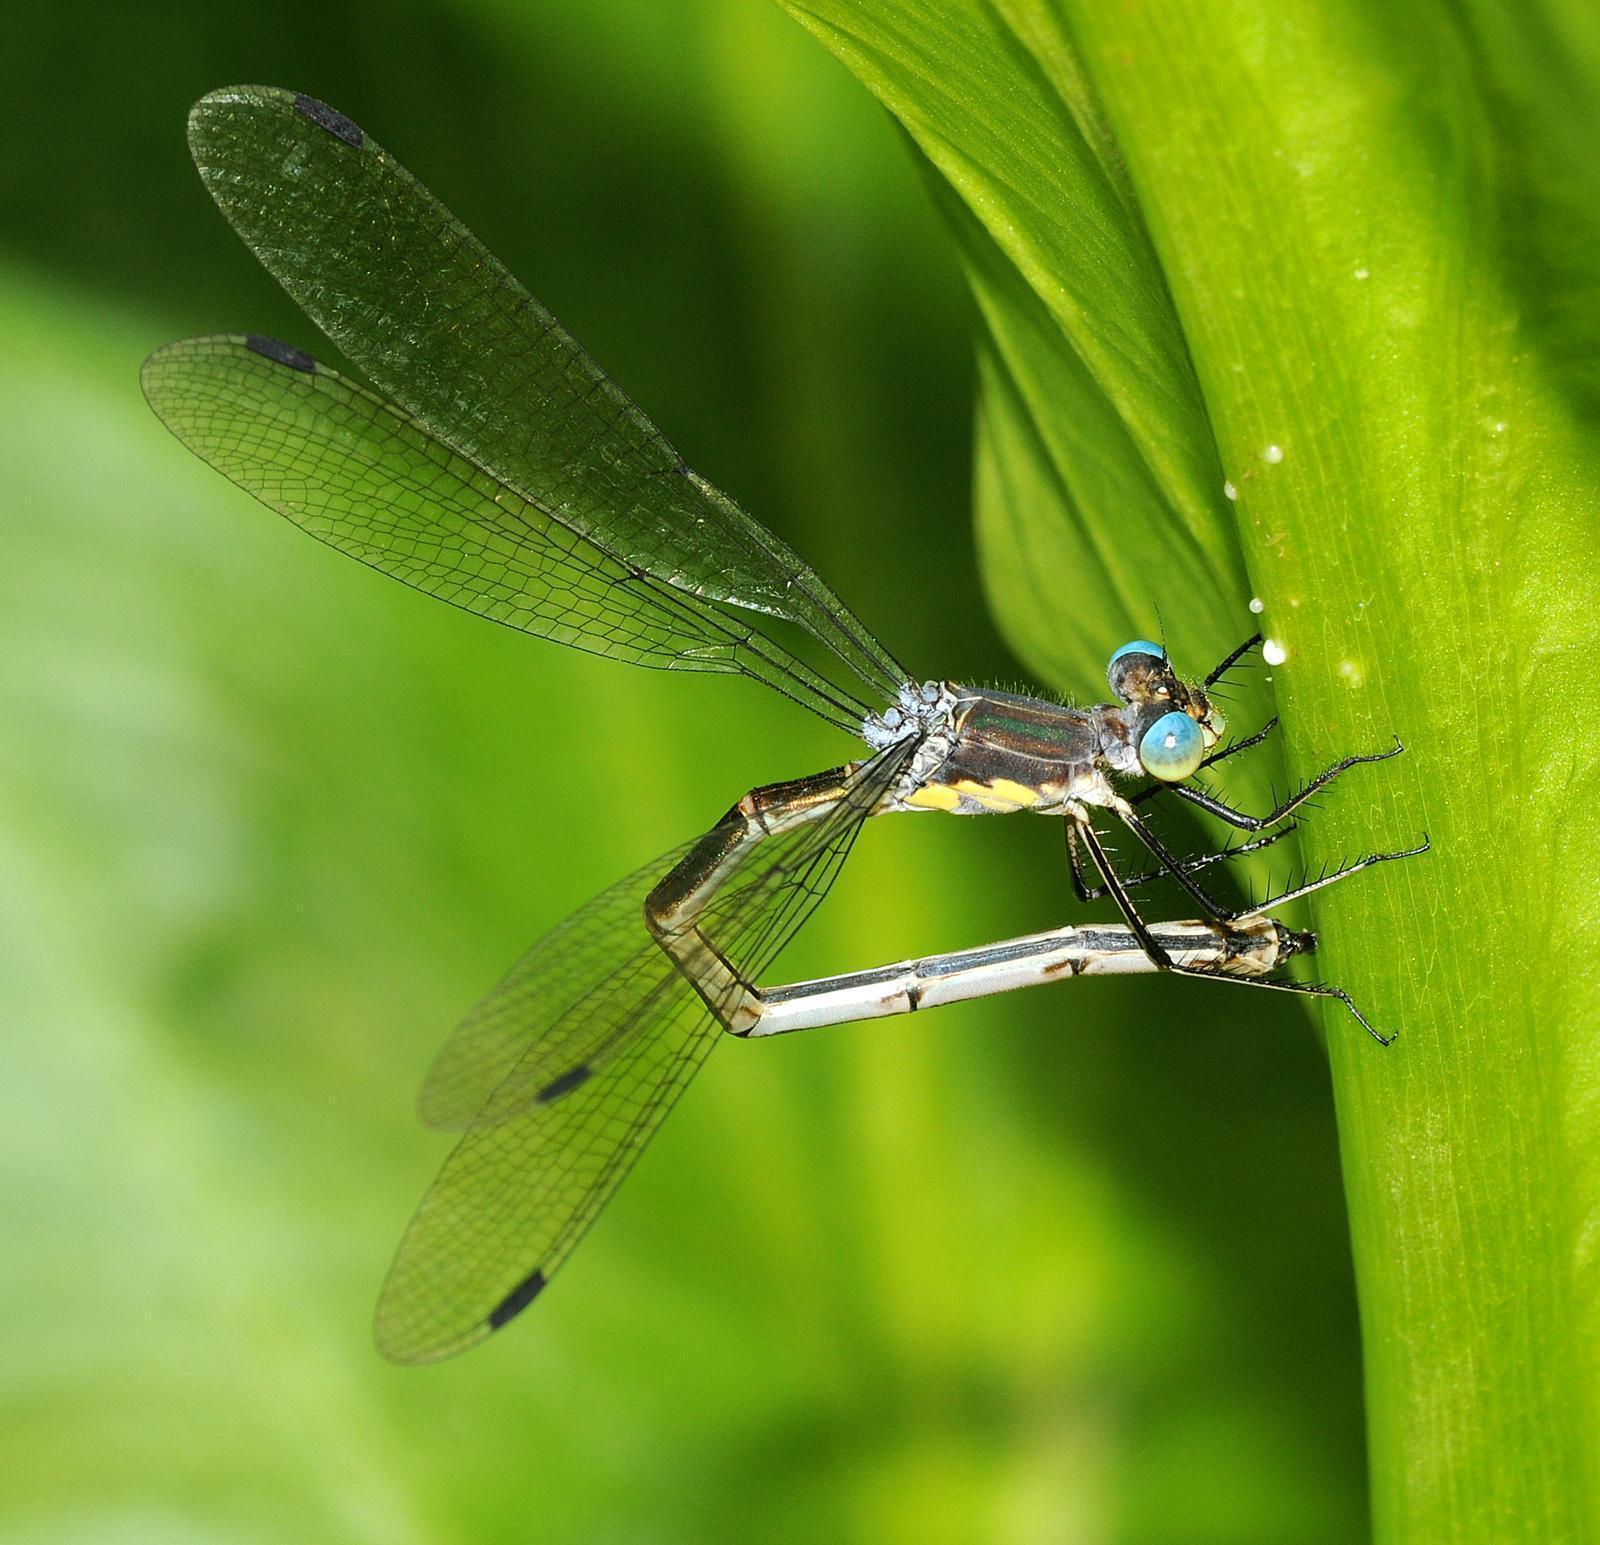 Amber-winged Spreadwing Photo by marion dobbs